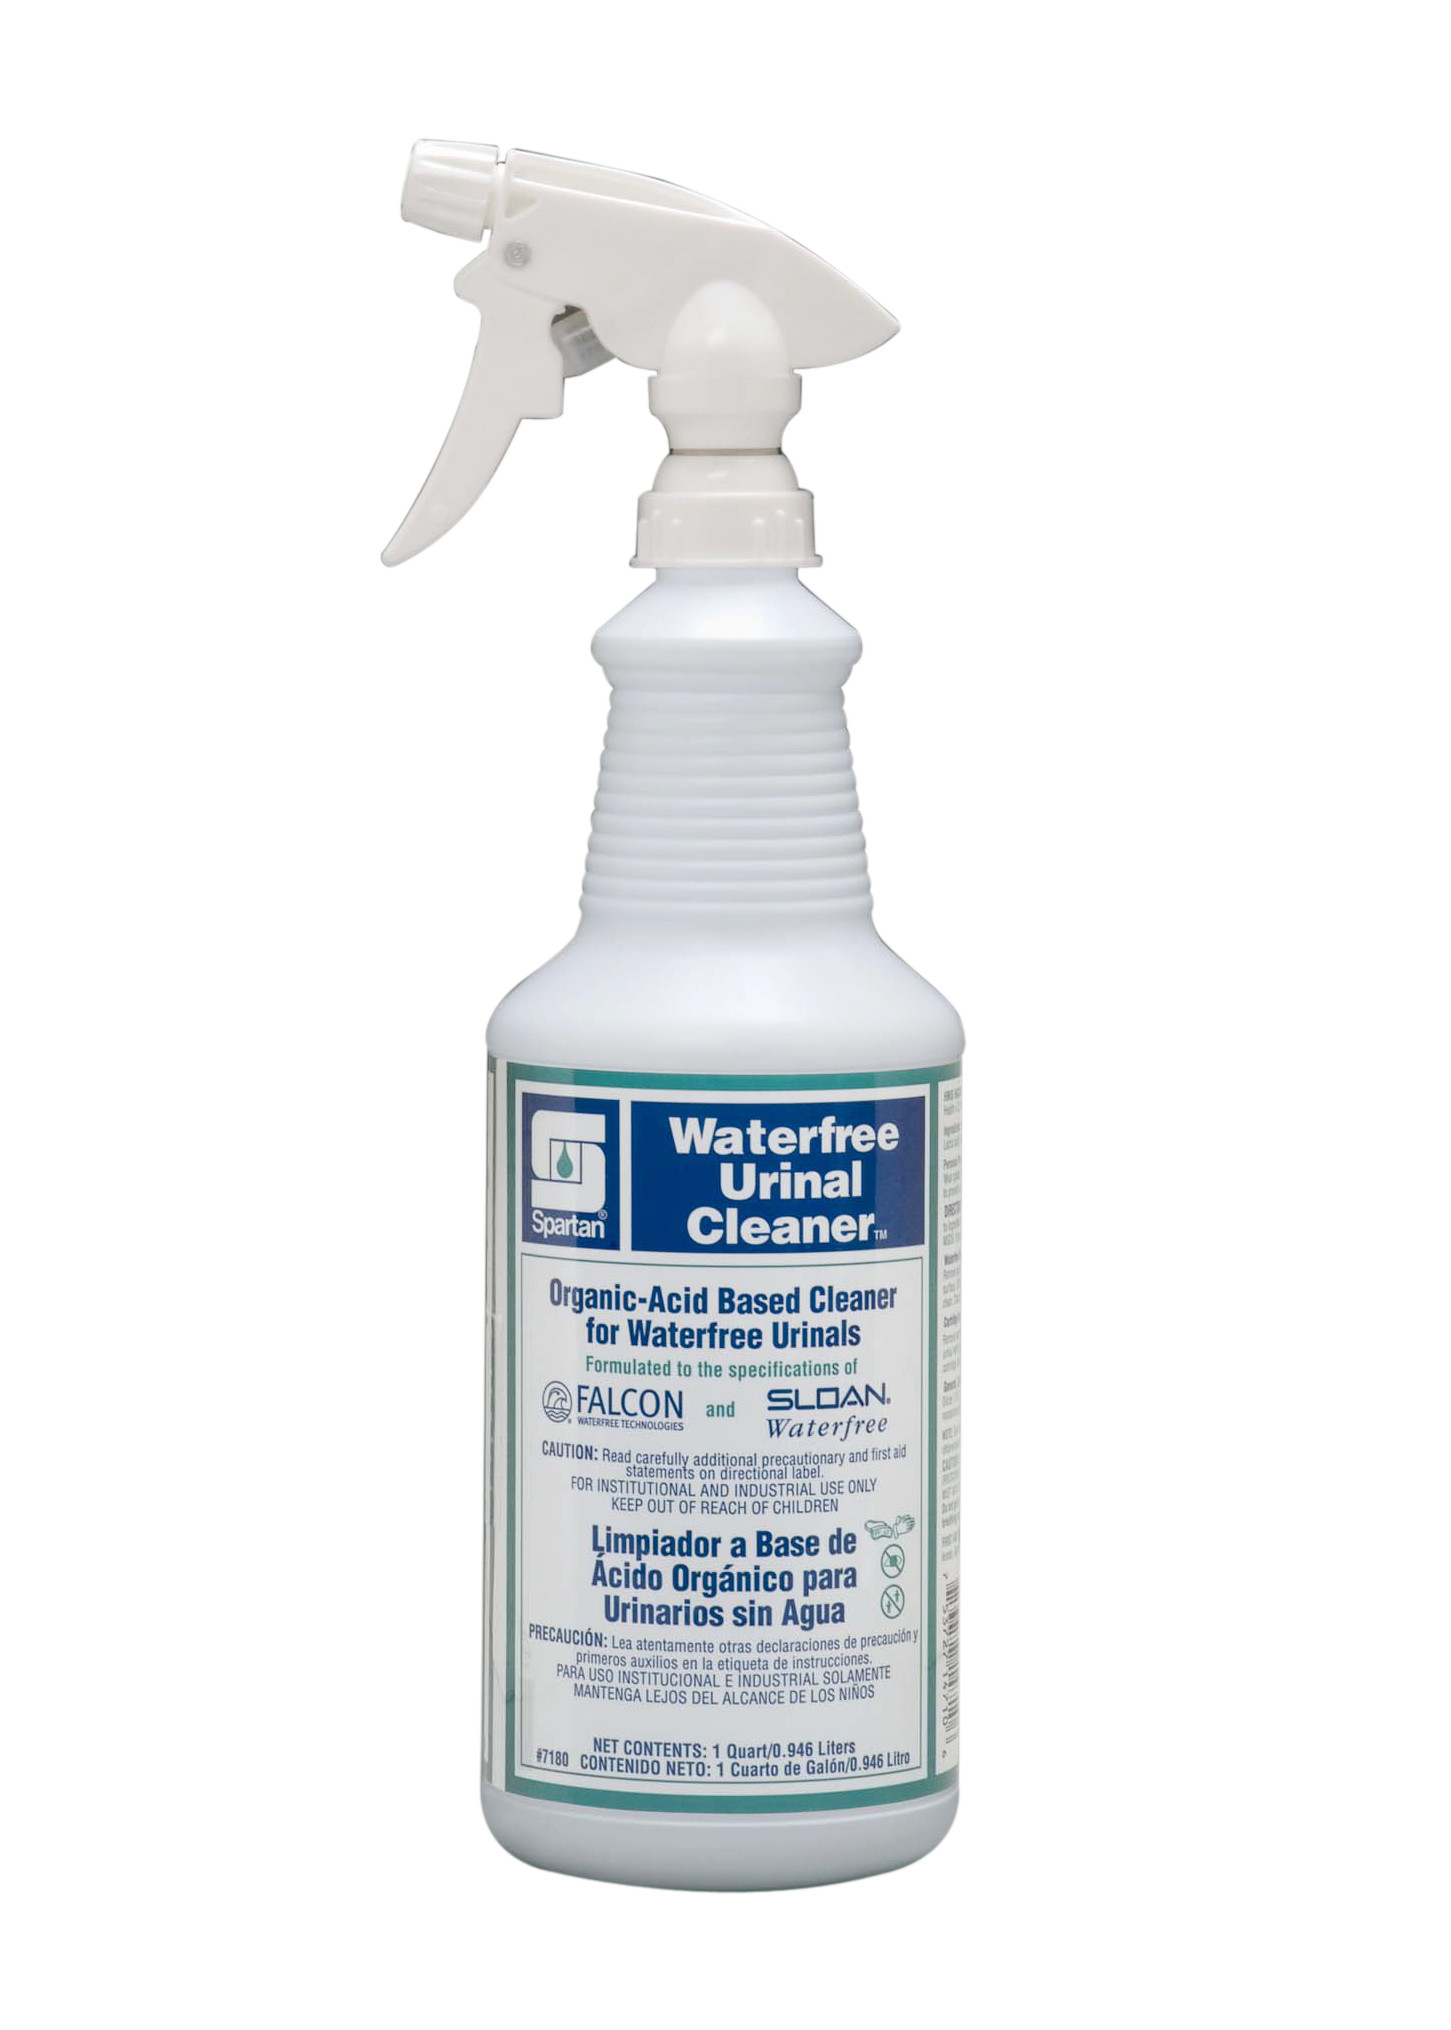 Spartan Chemical Company Waterfree Urinal Cleaner, 1 Quart bottle